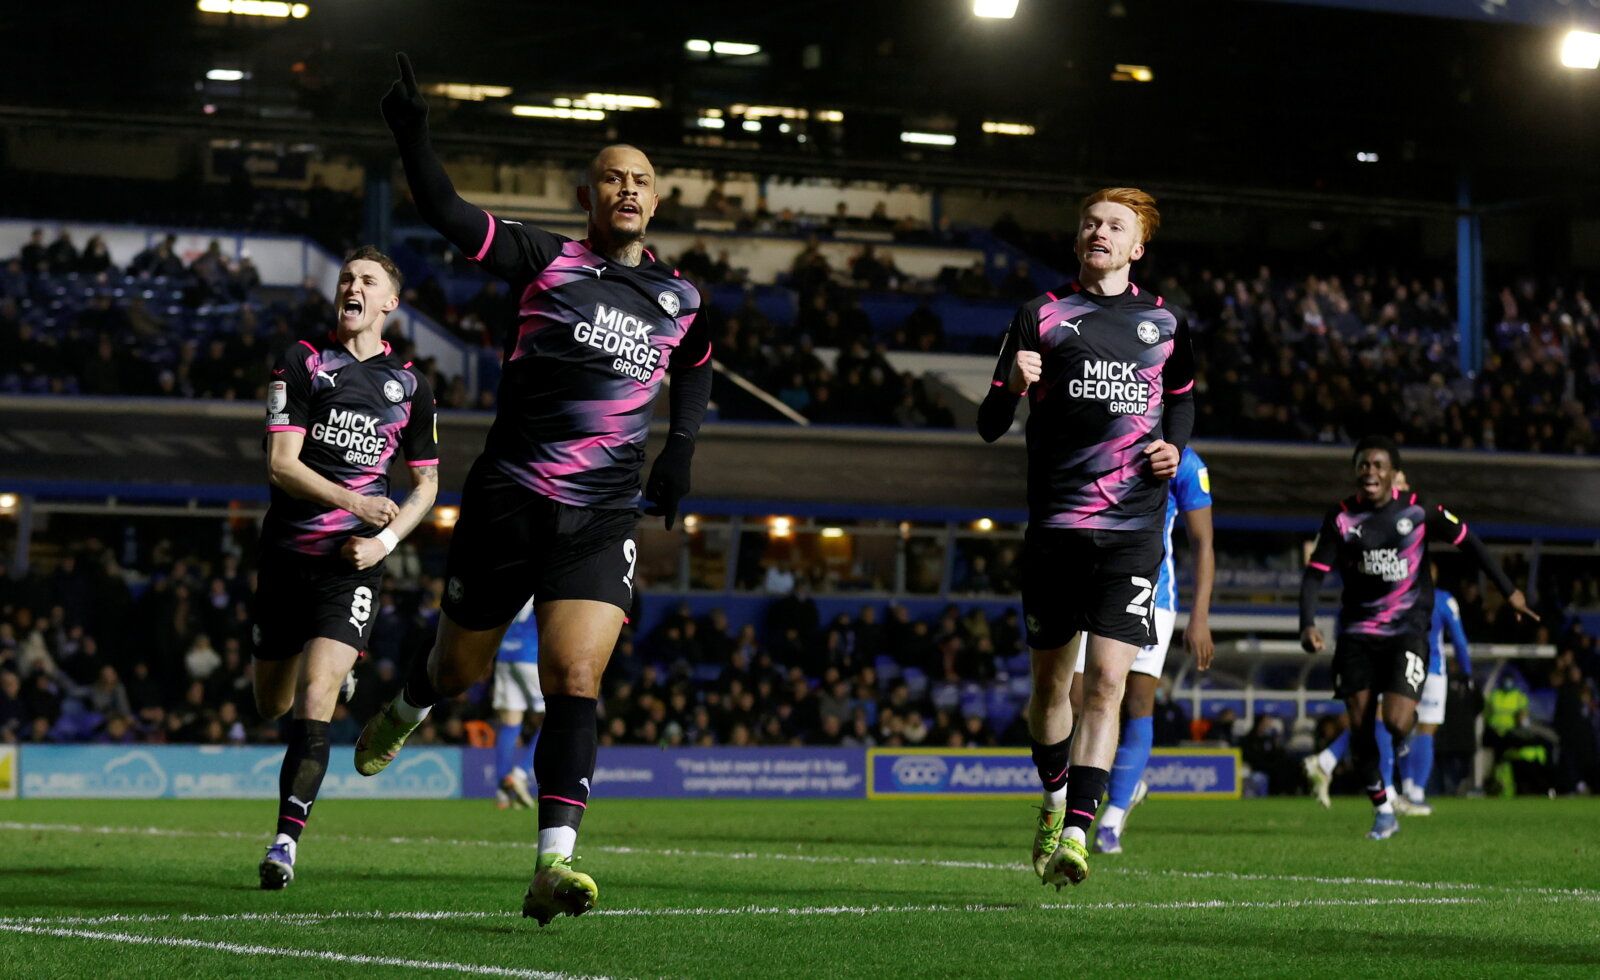 Soccer Football - Championship - Birmingham City v Peterborough United - St Andrew's, Birmingham, Britain - January 25, 2022 Peterborough United's Jonson Clarke-Harris celebrates scoring their second goal Action Images/Jason Cairnduff  EDITORIAL USE ONLY. No use with unauthorized audio, video, data, fixture lists, club/league logos or "live" services. Online in-match use limited to 75 images, no video emulation. No use in betting, games or single club/league/player publications.  Please contact 